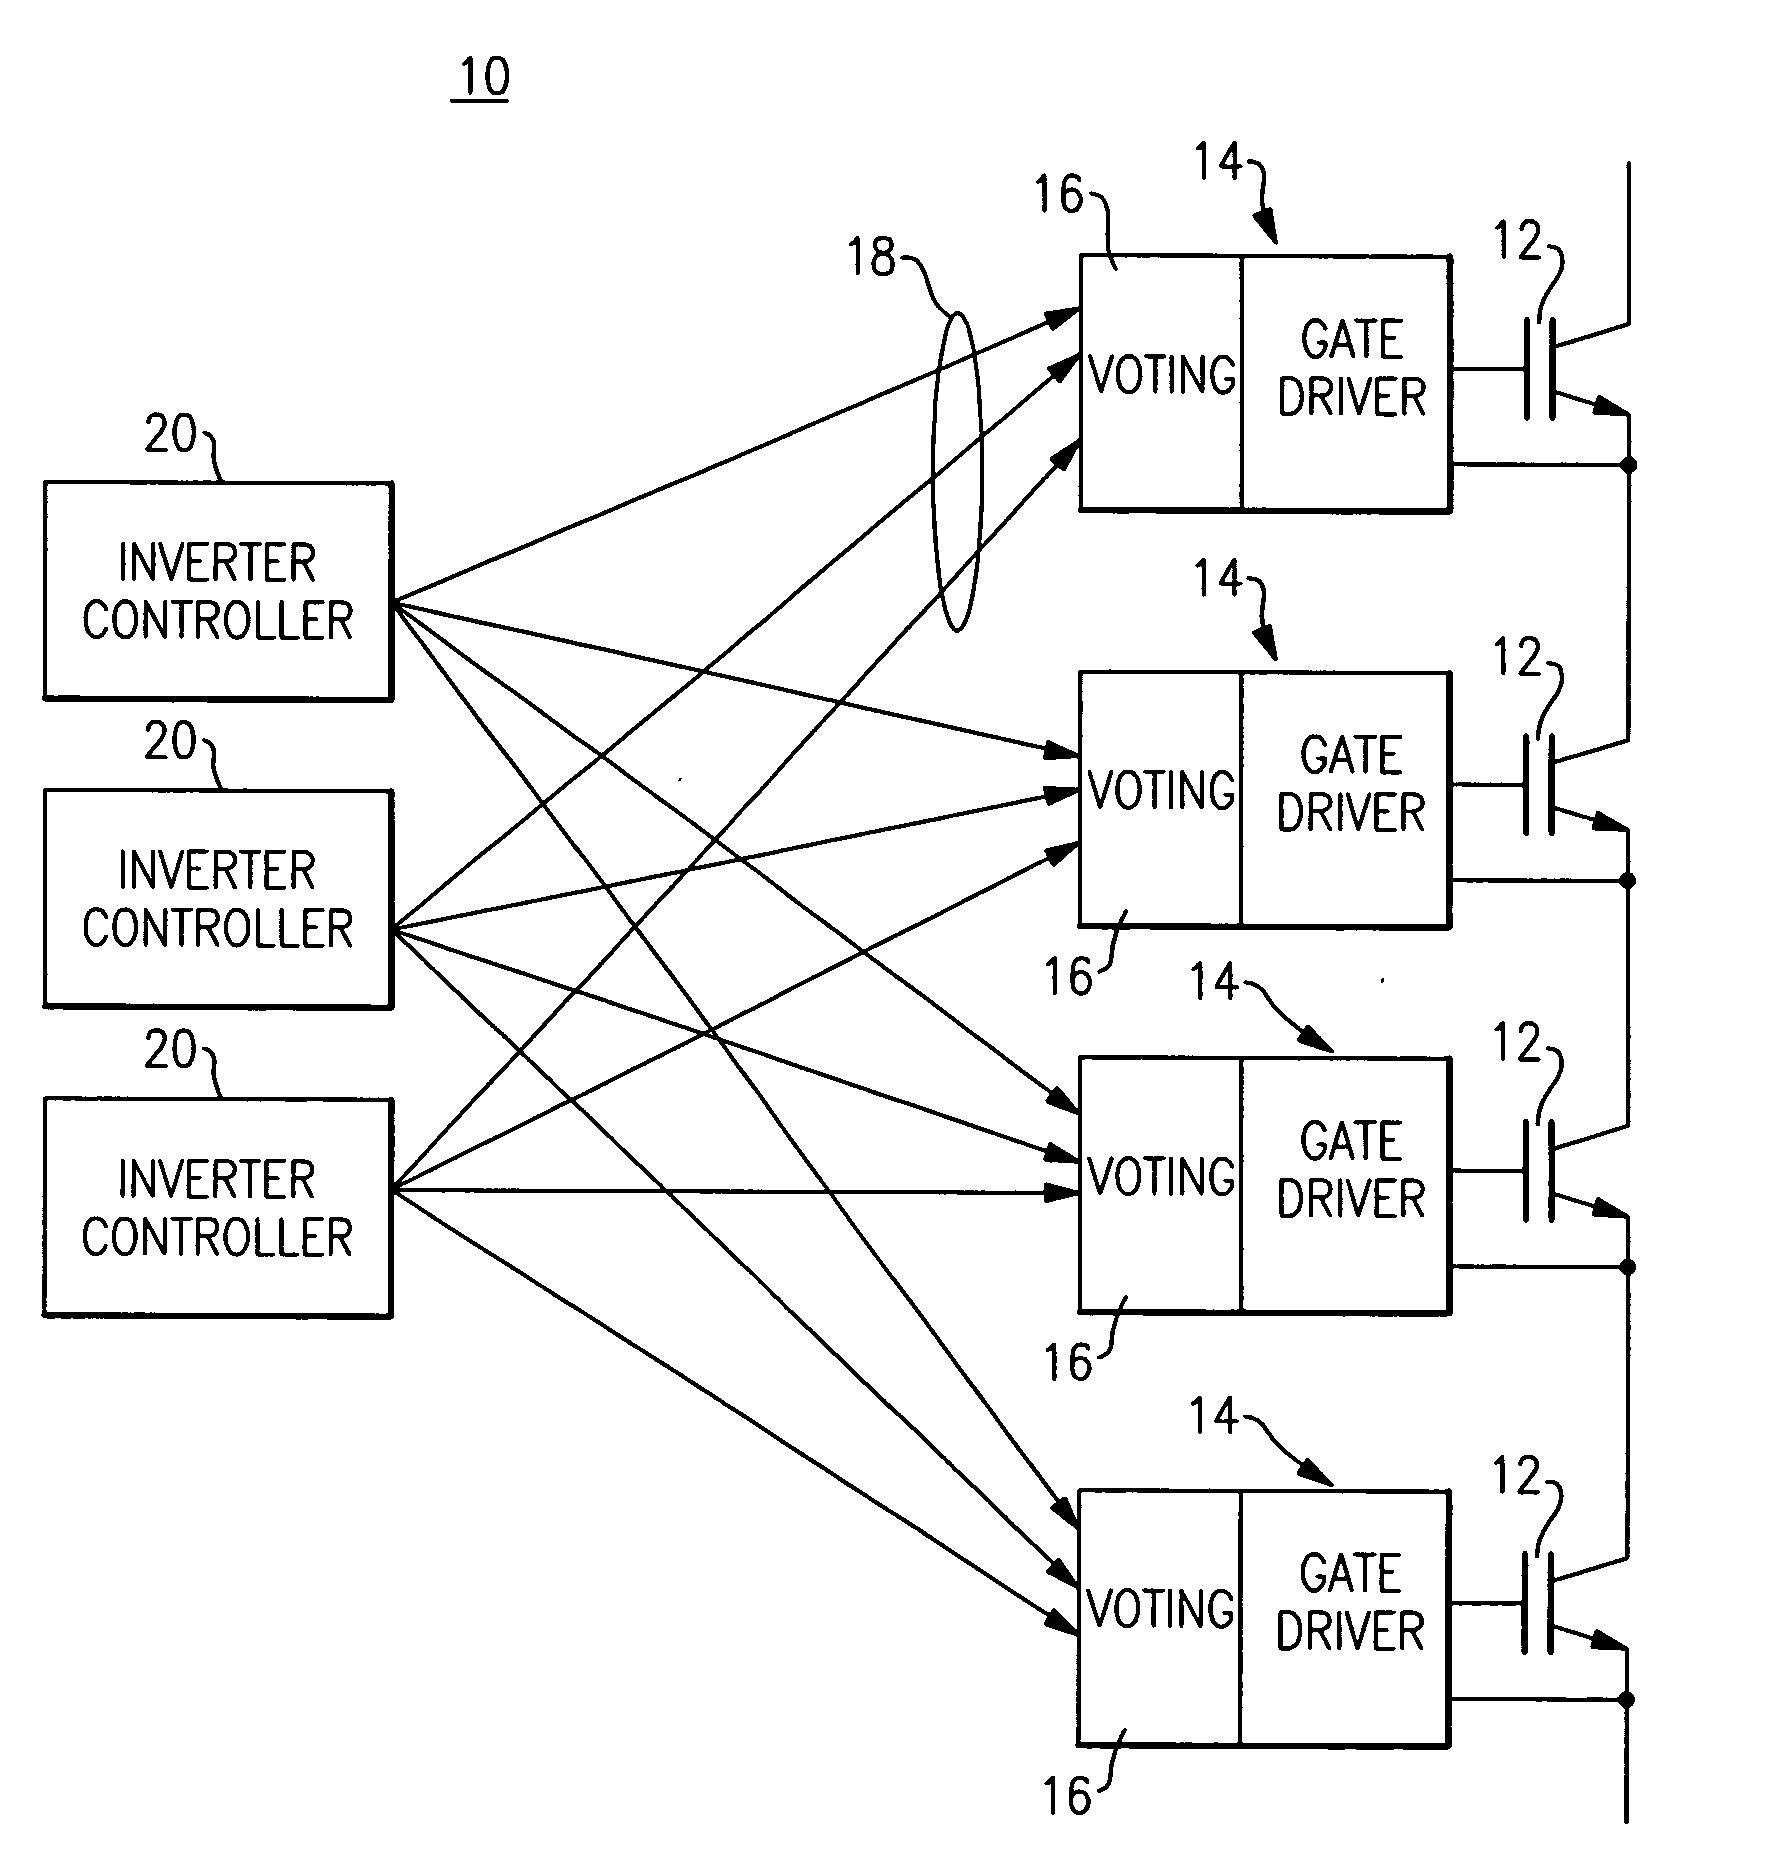 Circuit and topology for very high reliability power electronics system